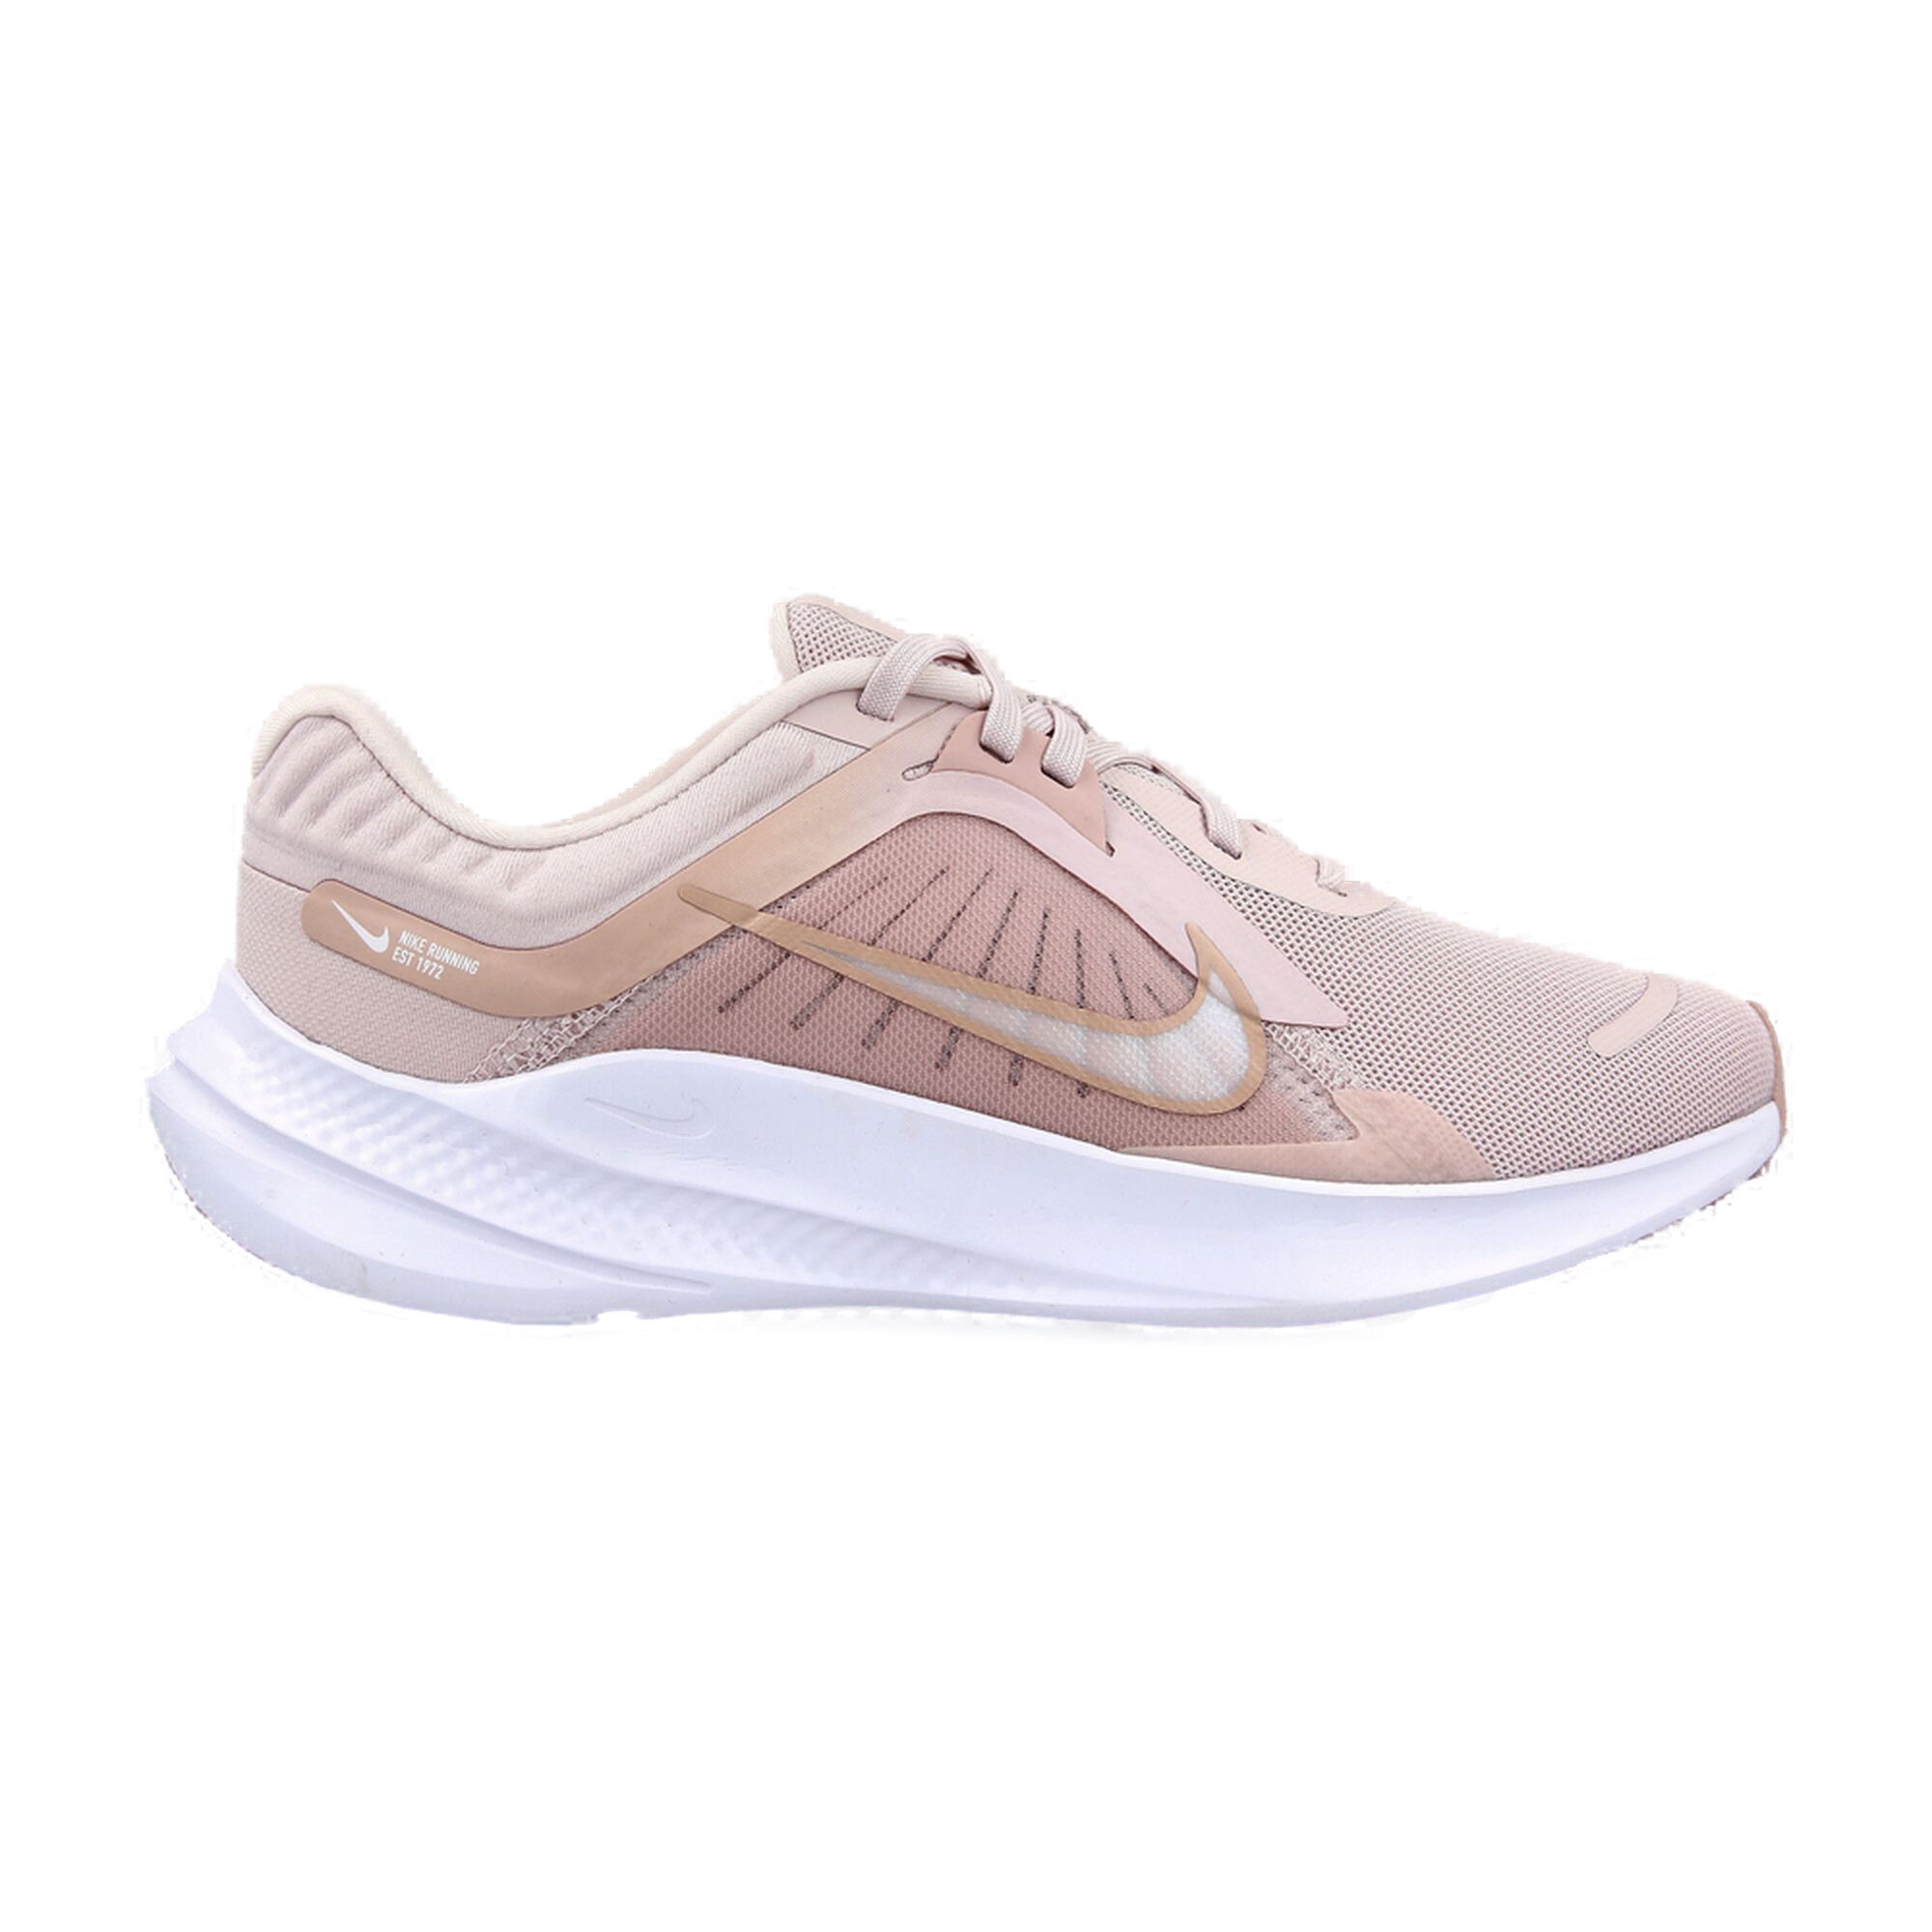 NIKE Quest 5 barely rose/pink oxford/white/rose whisper